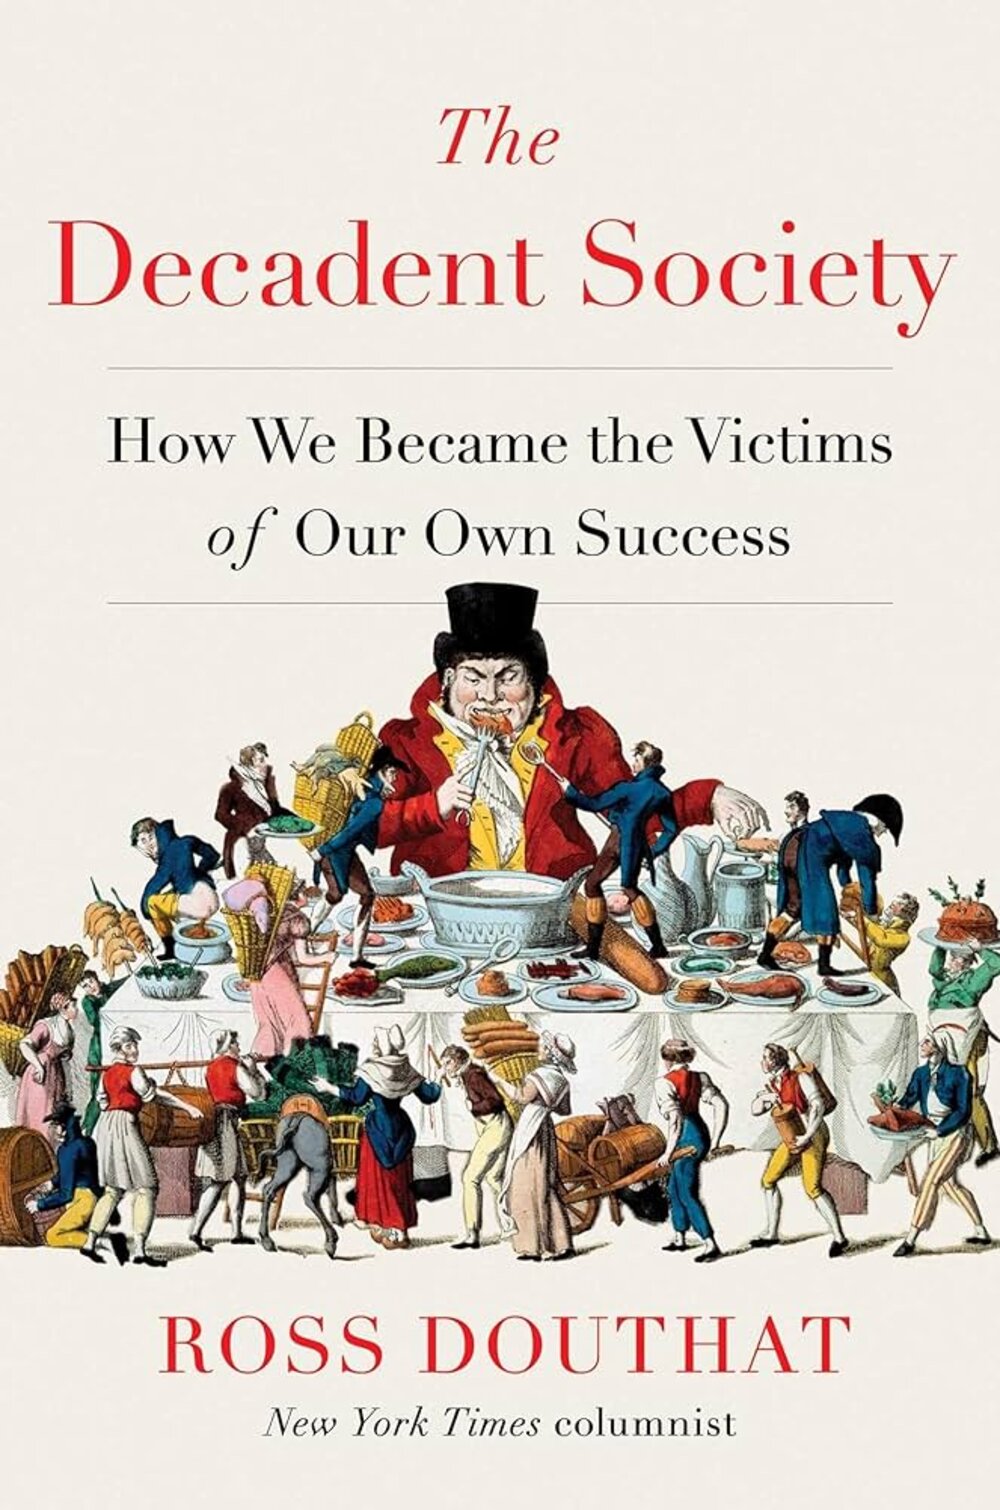 The Decadent SocietyDouthat, Ross